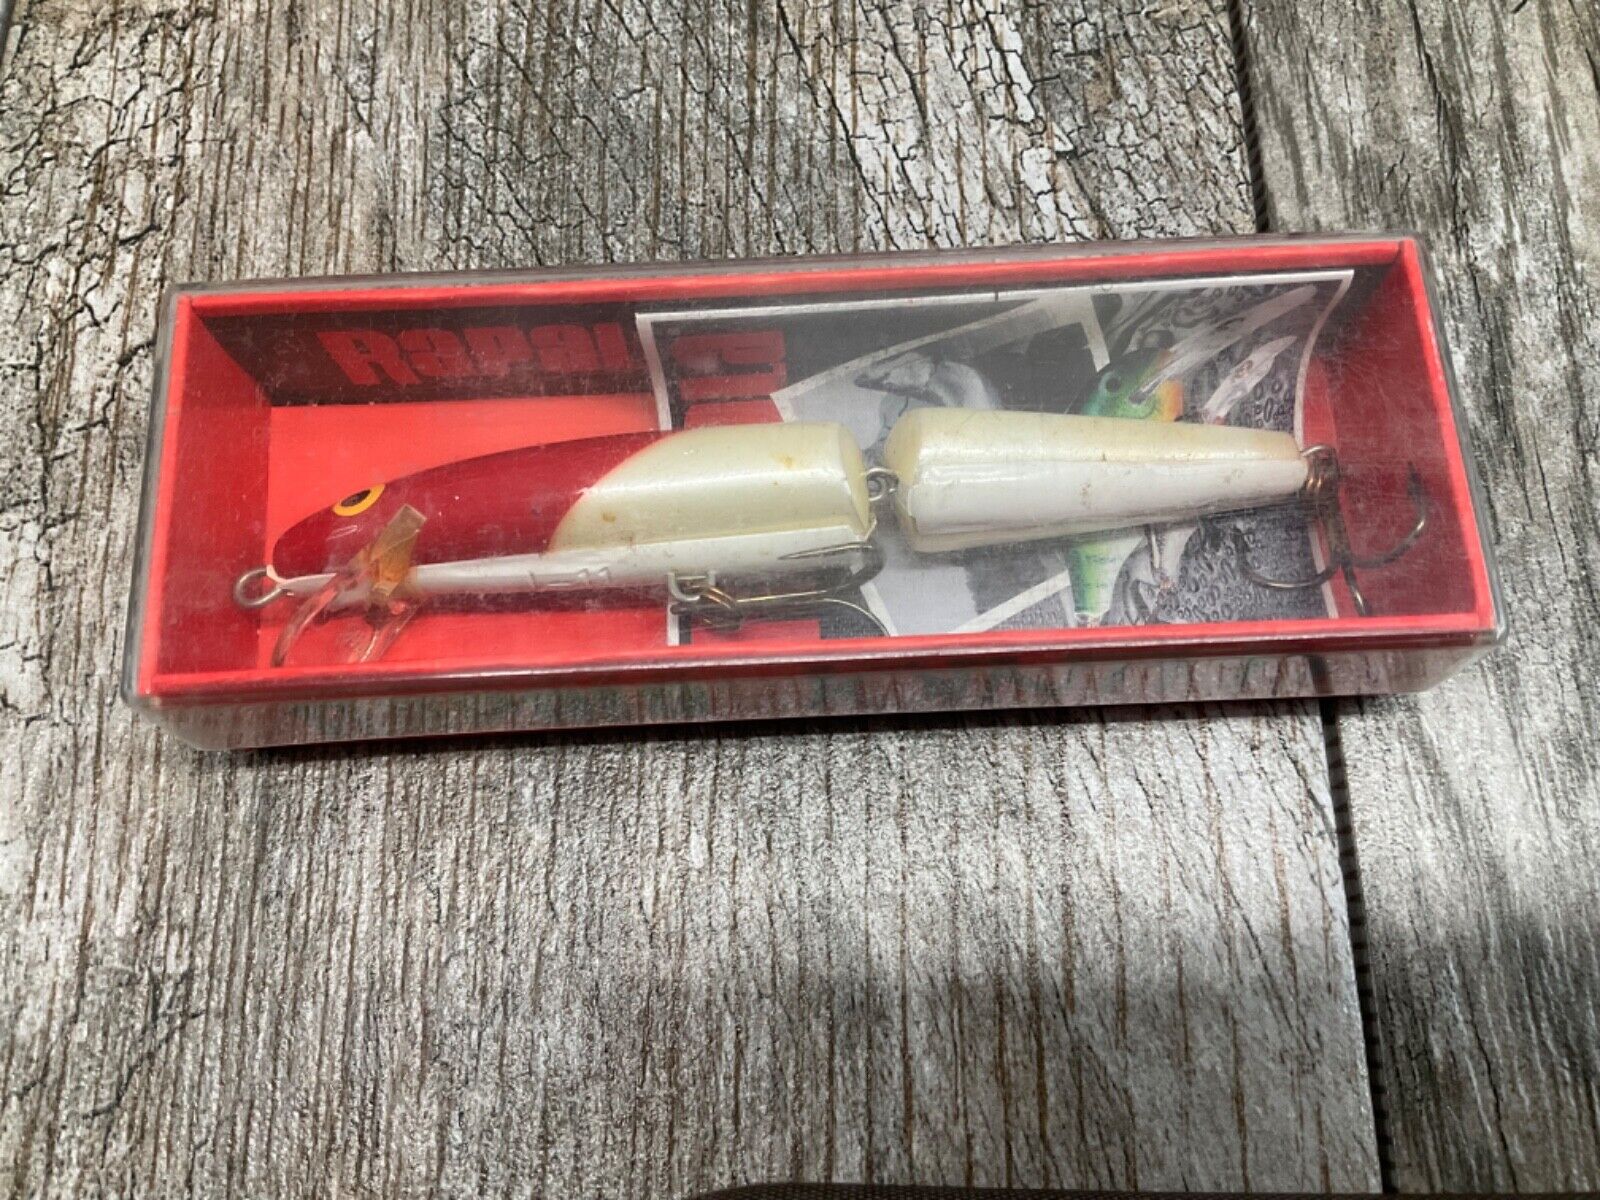 FISHING LURE RAPALA JOINTED J 11 RH red white color rare collector discontinued